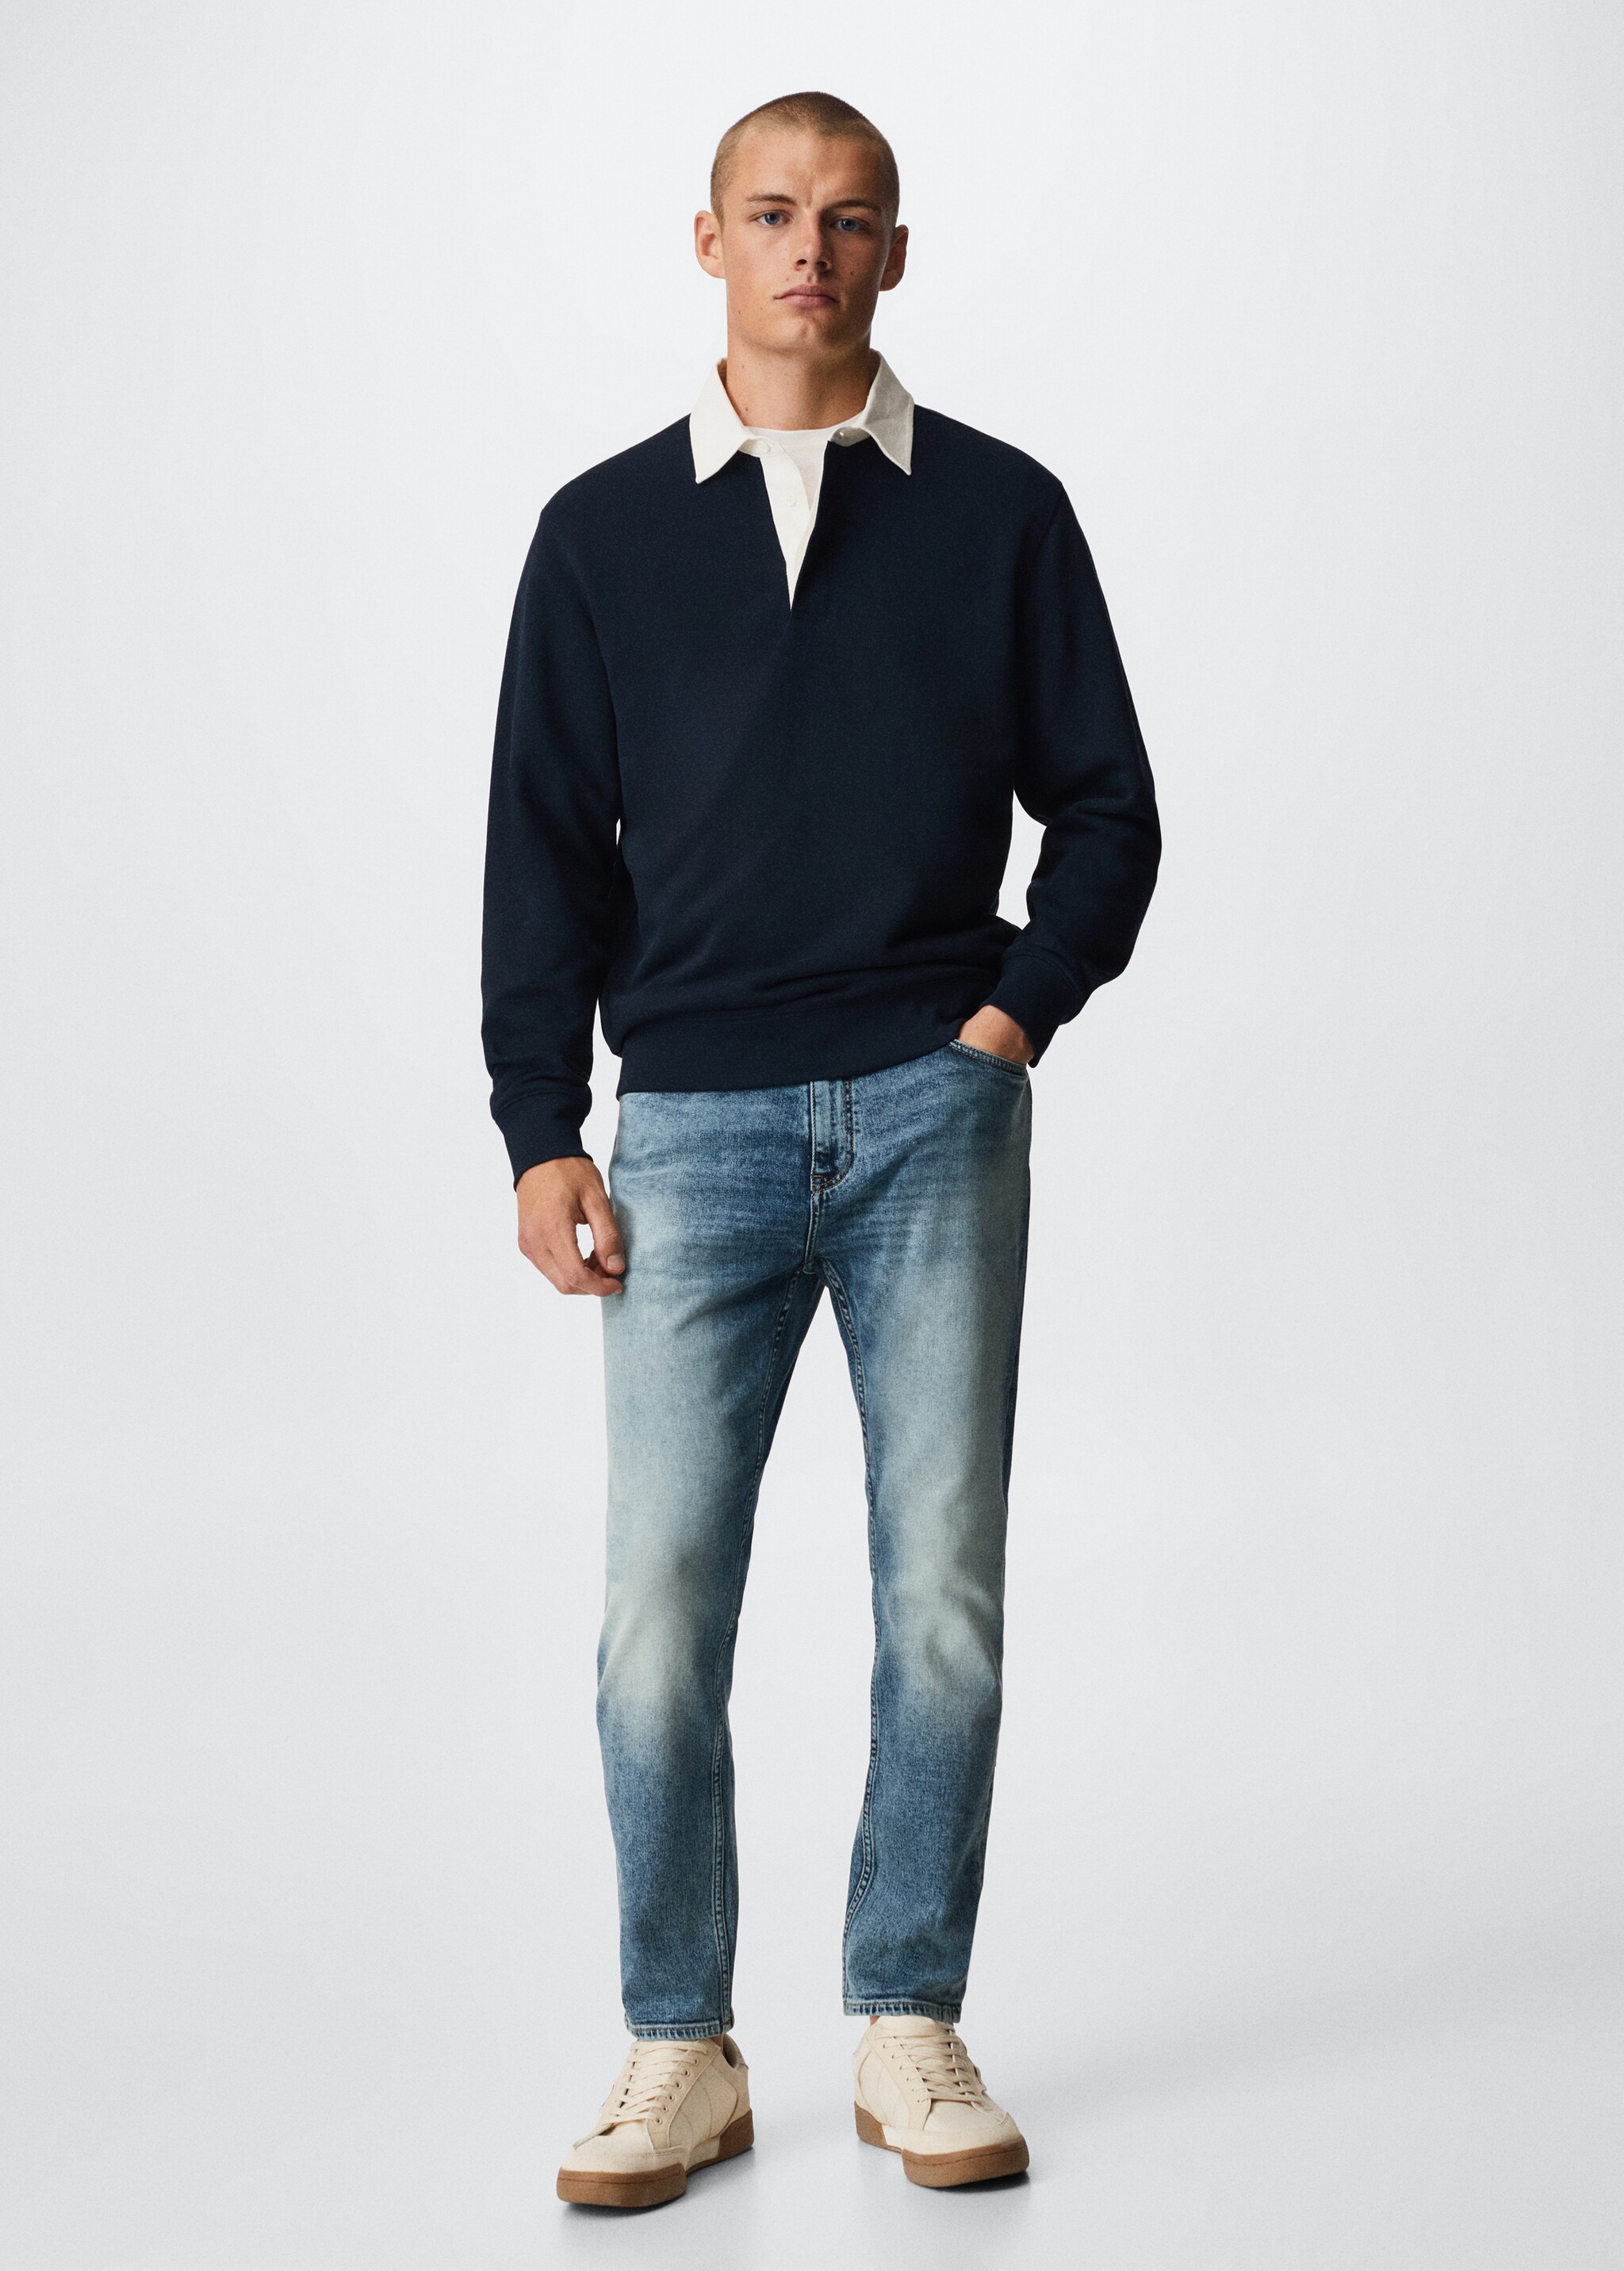 Jeans Tom tapered fit - Plano general